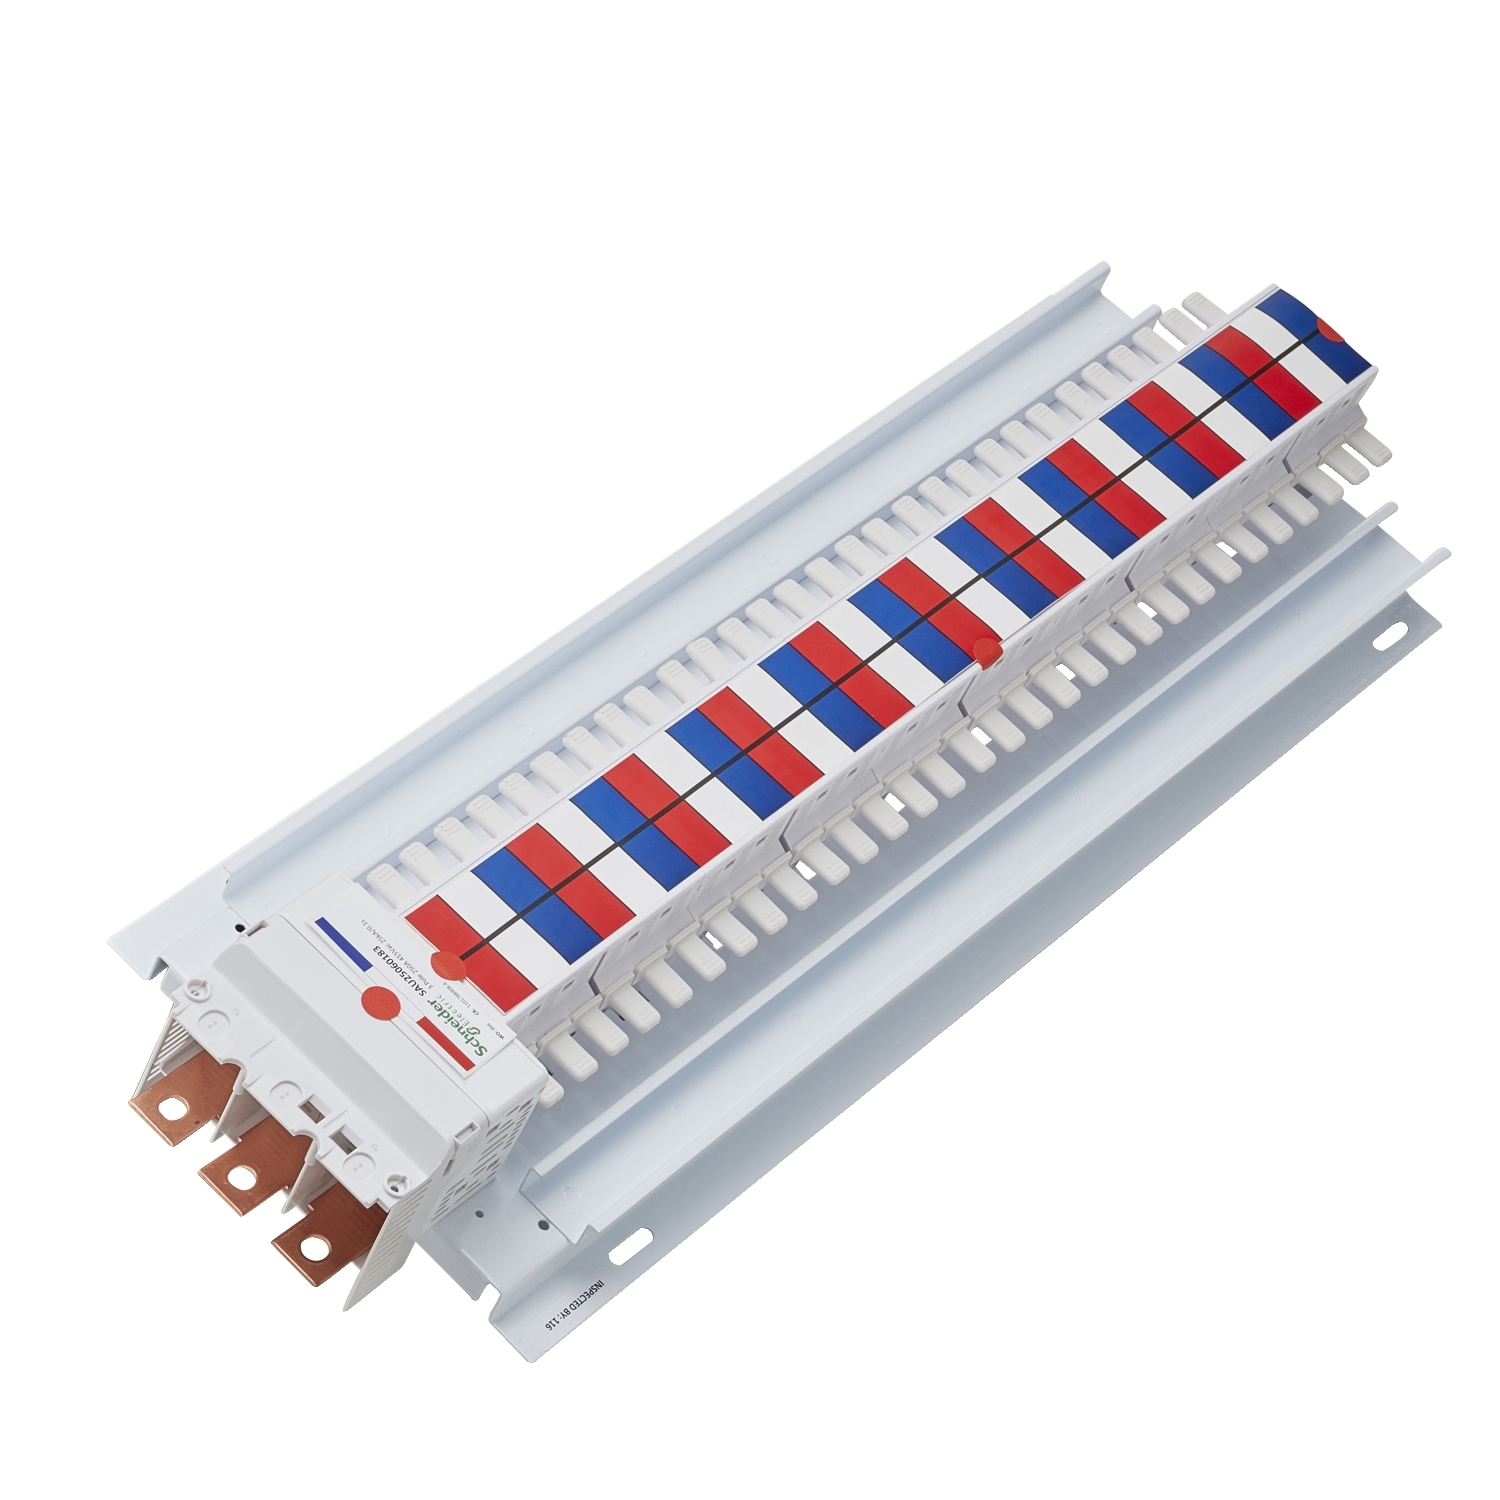 SAU Chassis, Acti9, 250A, 3Ph, 60 poles, 18mm for iC60 MCB and RCBO, top or bottom